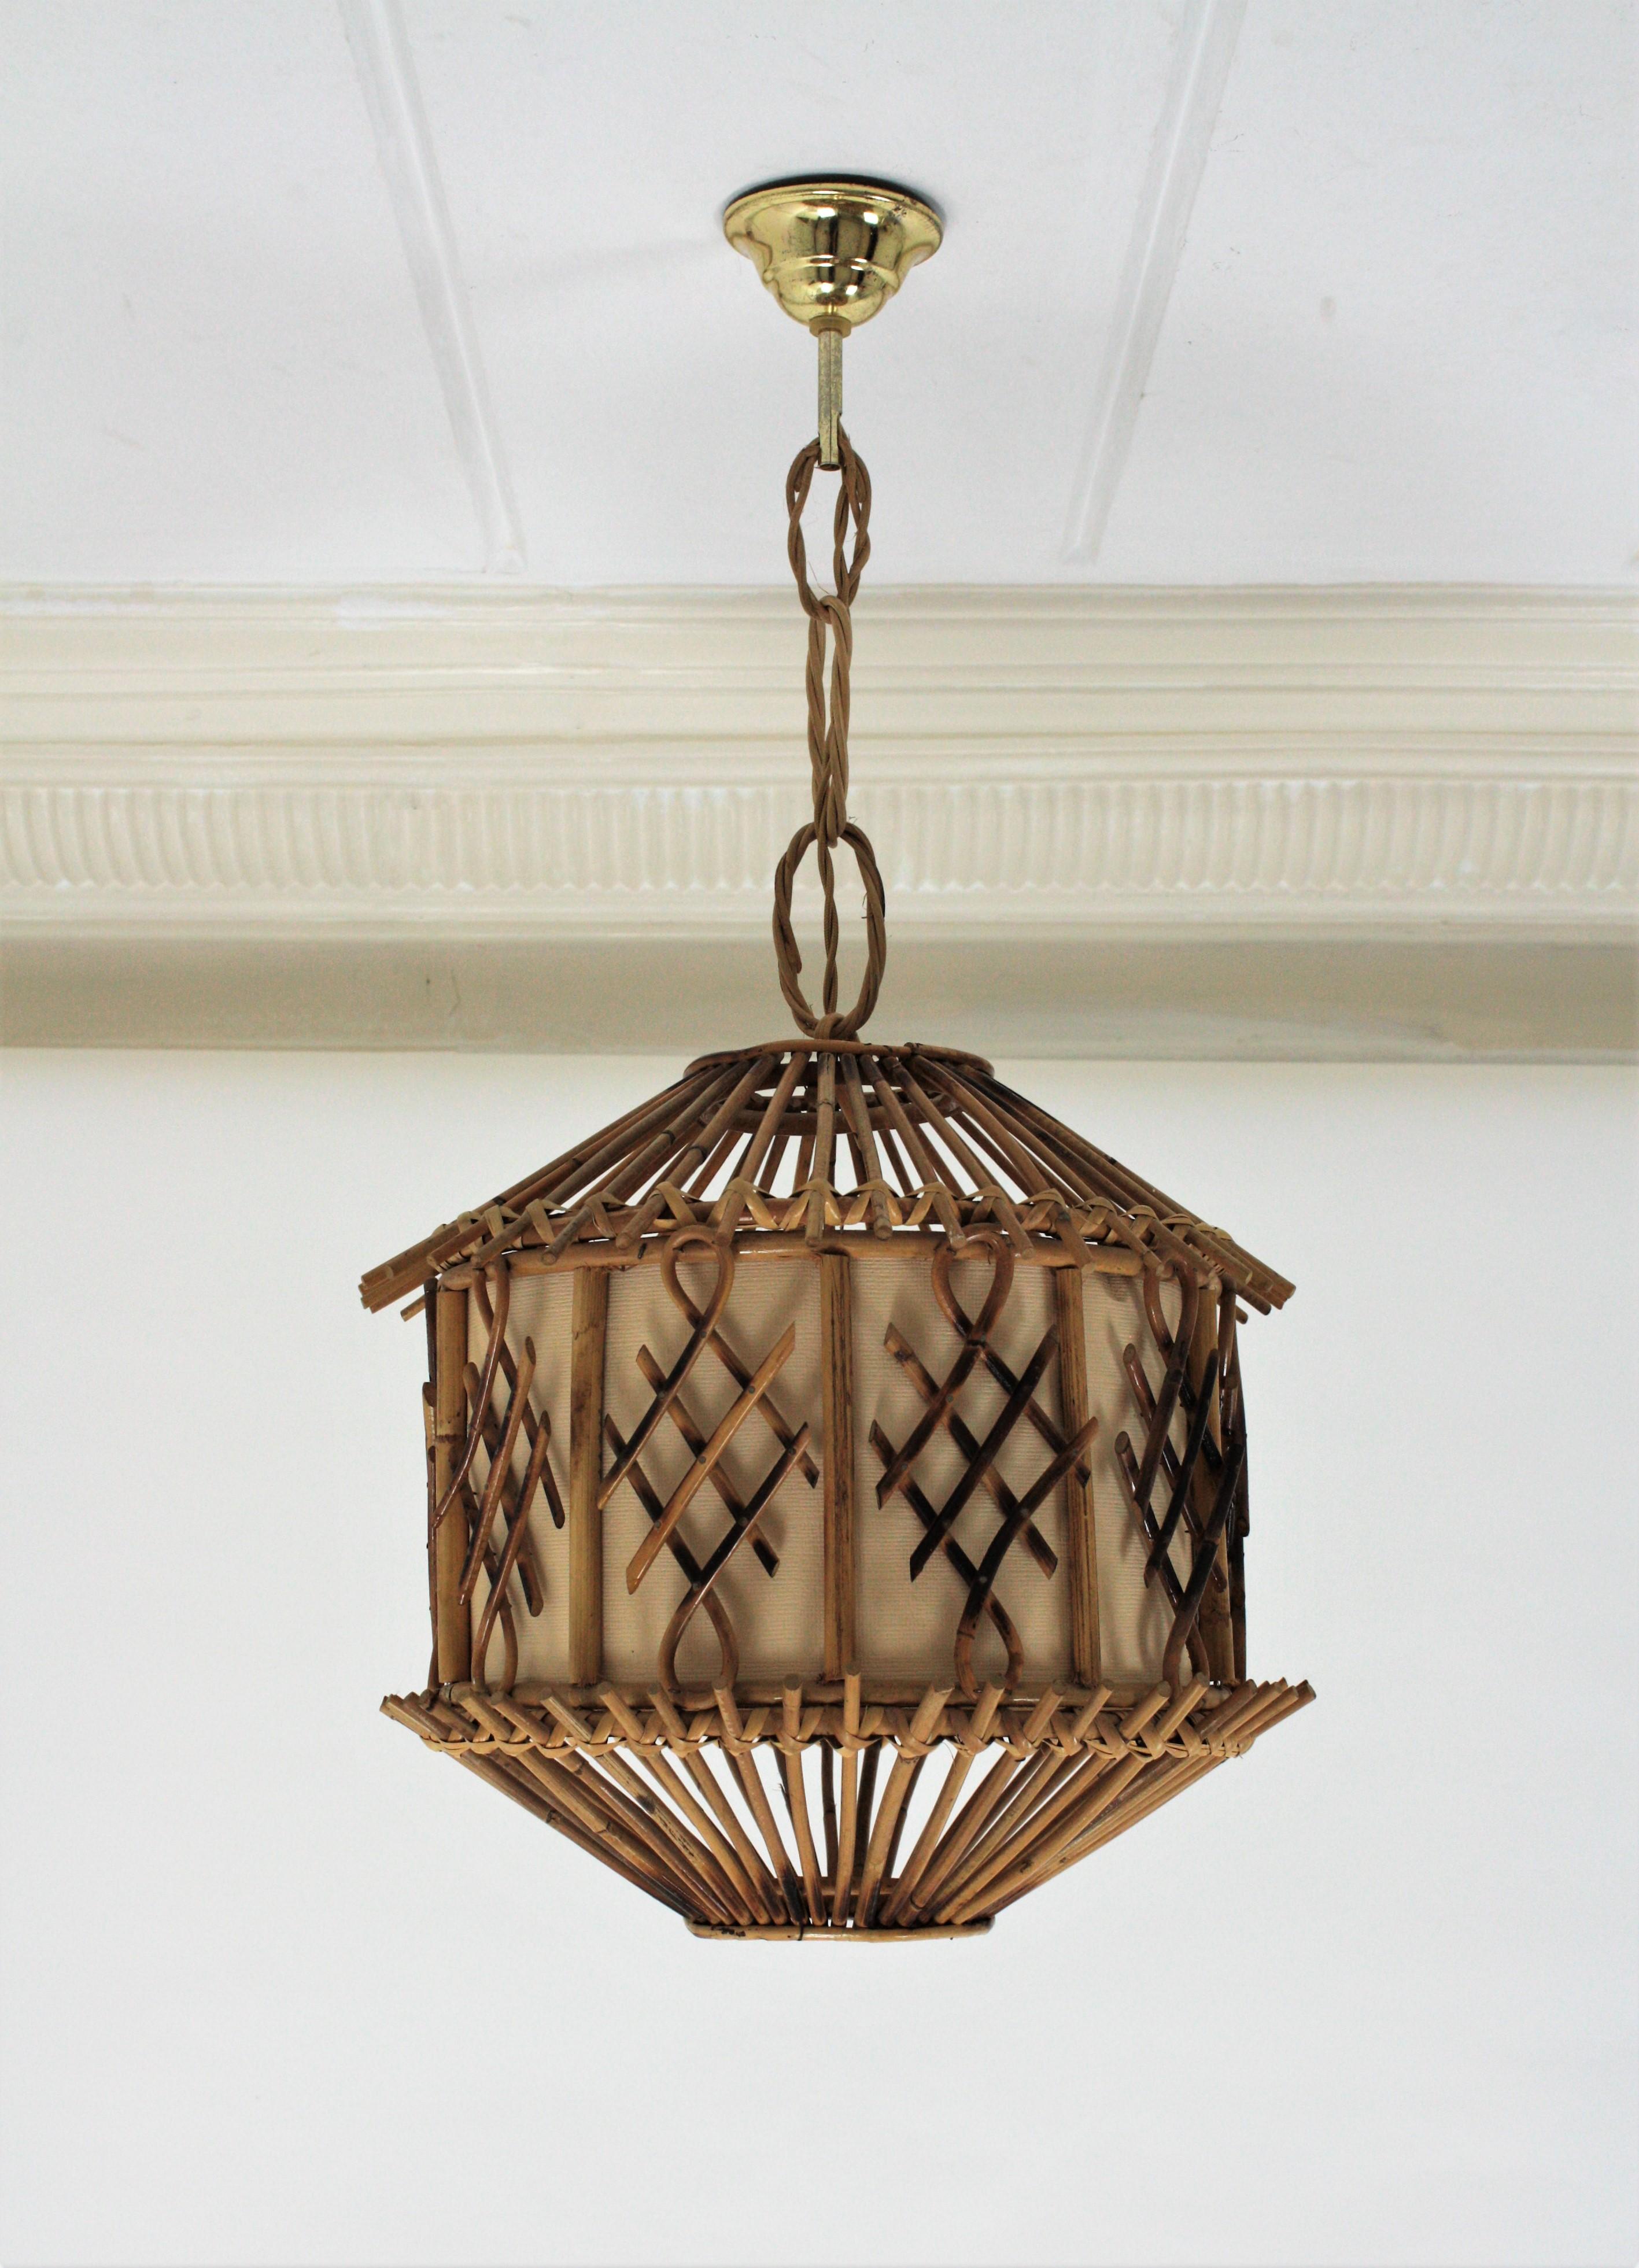 Brass French Modernist Rattan Pendant Lantern / Hanging Light with Chinoiserie Accents